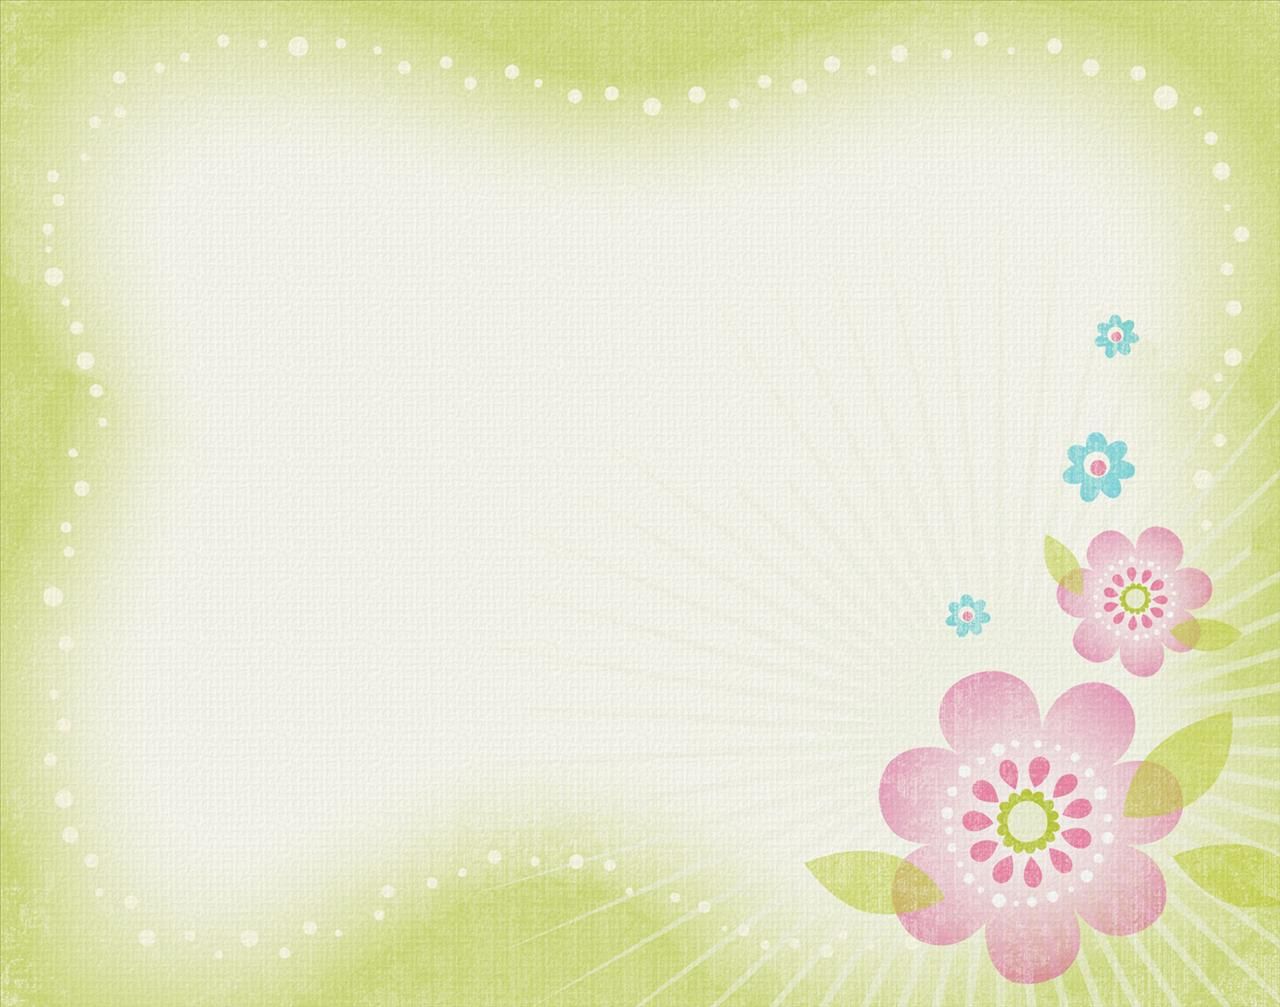 Spring Flower Right Frame Background For PowerPoint and Frame PPT